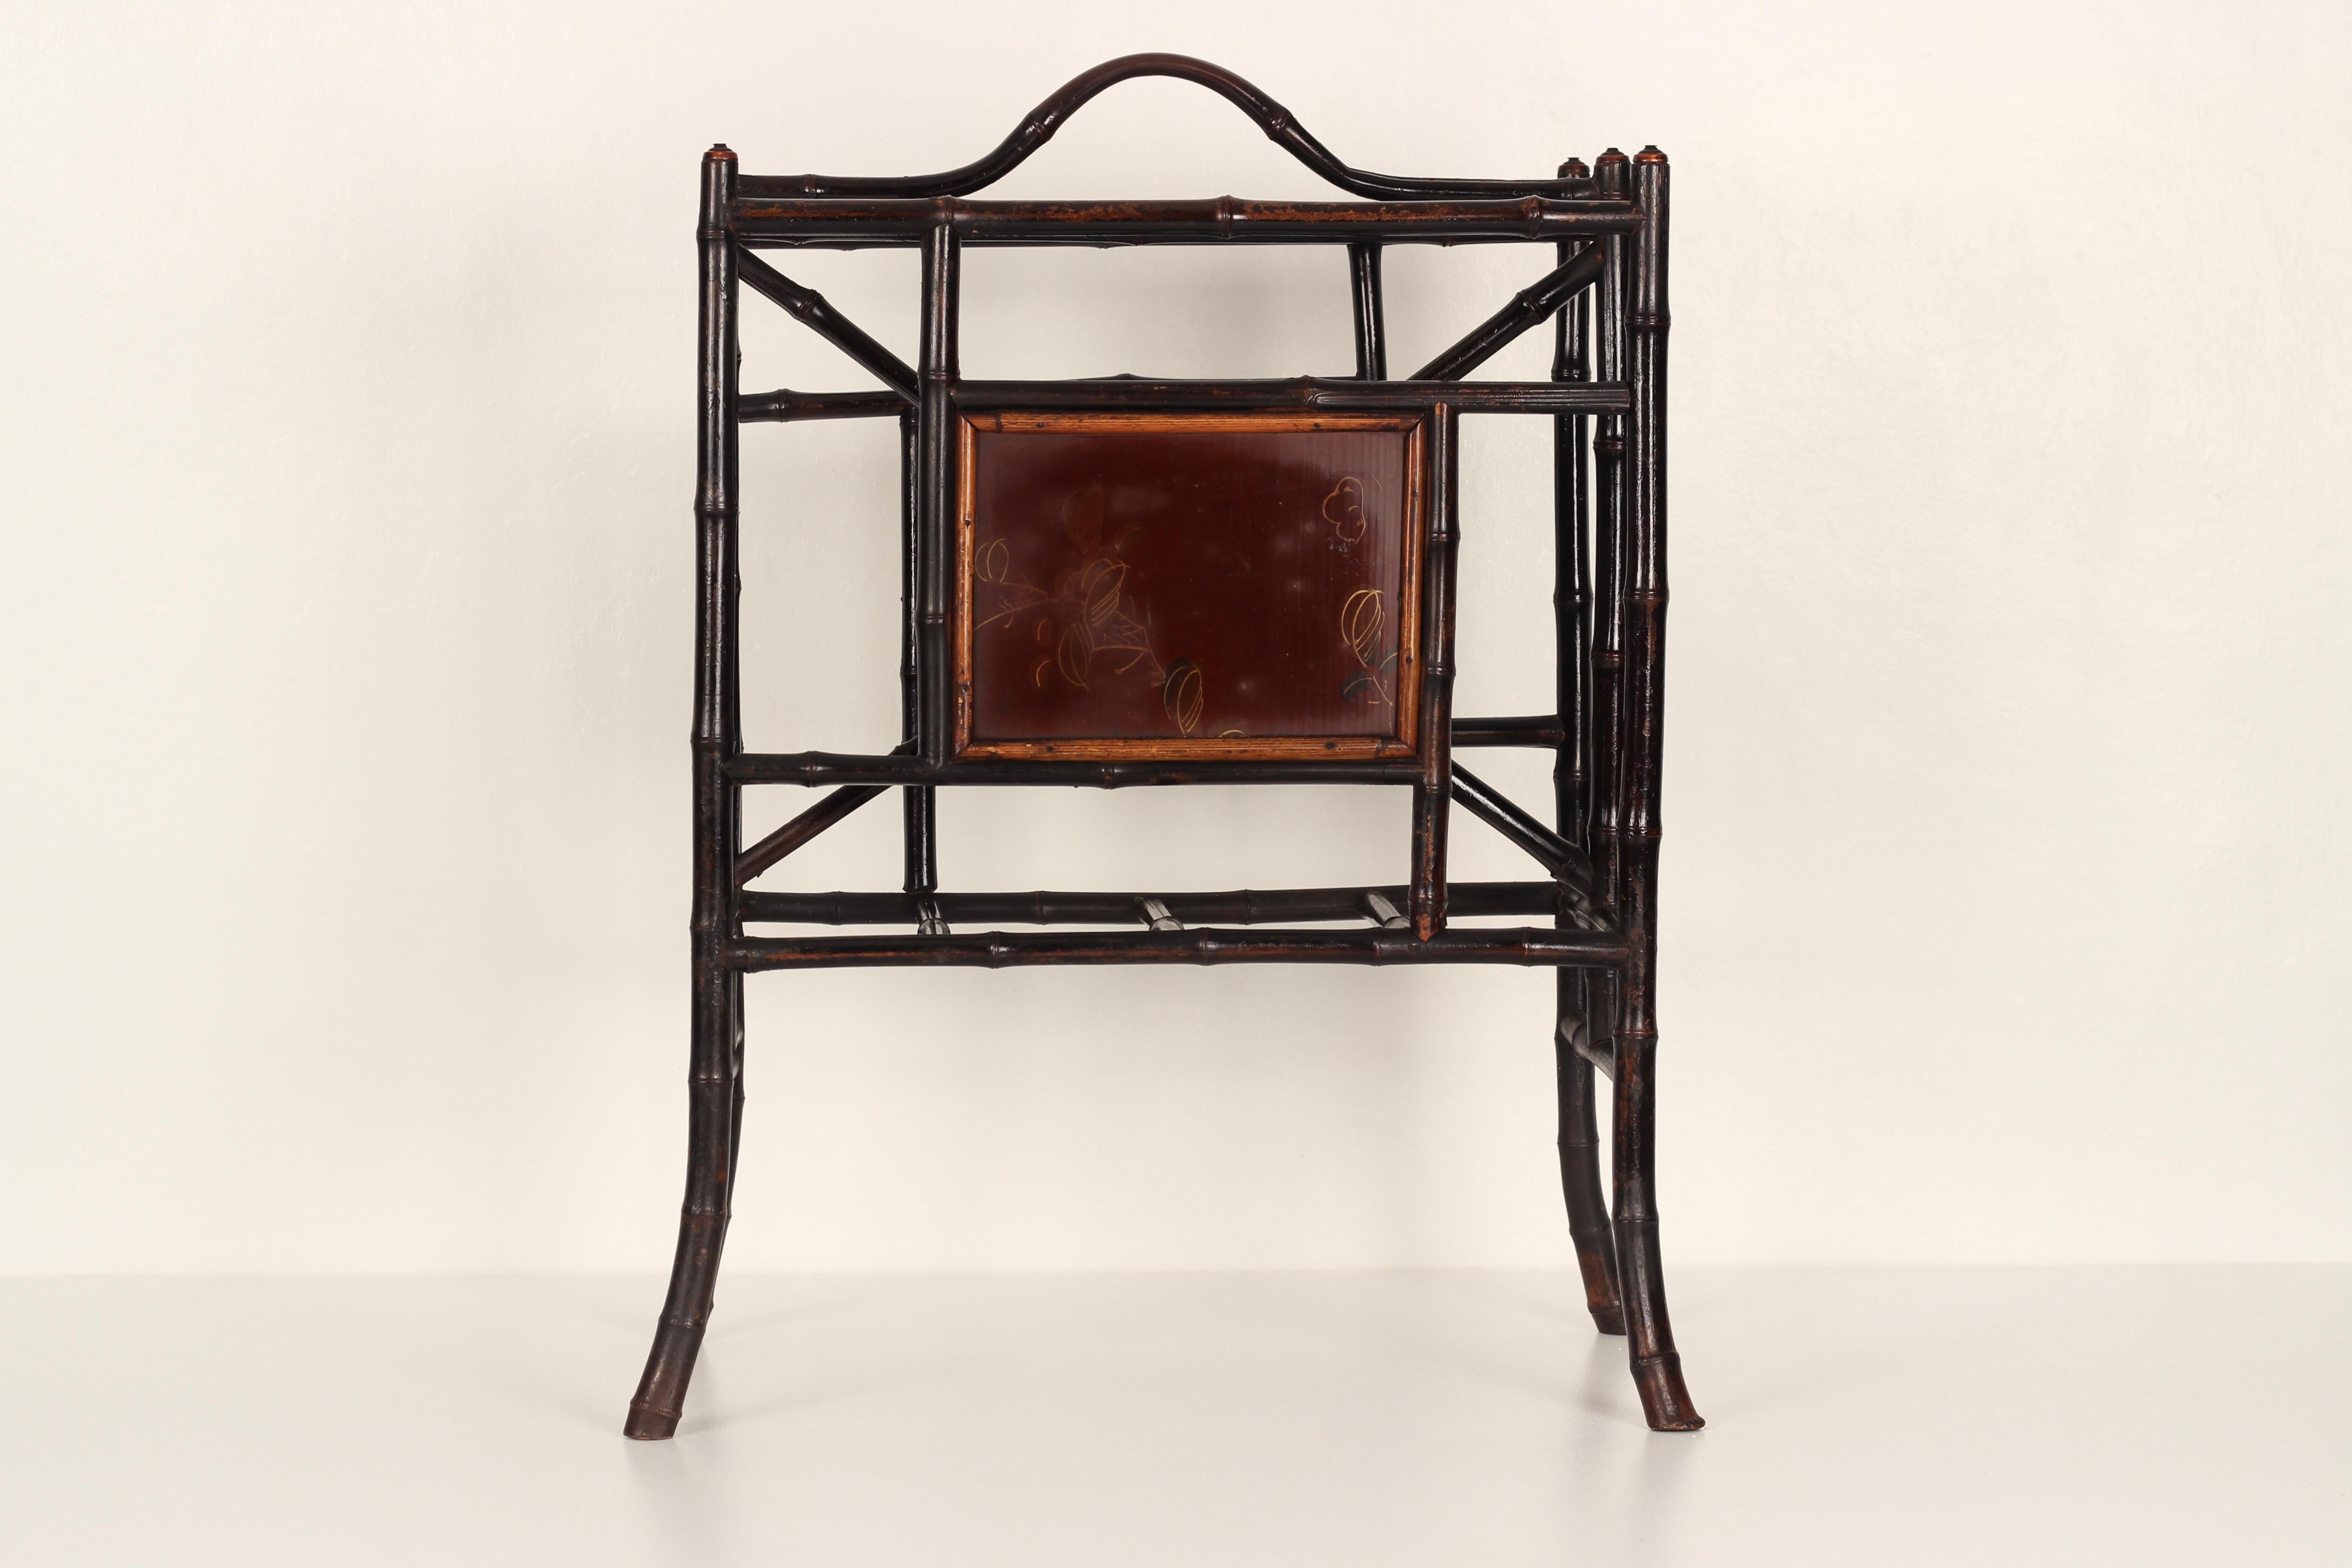 A Japanned Bamboo Victorian Aesthetic Movement Newspaper or magazine Rack/Canterbury with hand painted panels depicting stylised flowers and leaves.

The Aesthetic Movement was influenced heavily by the stylised renditions of China and Japan, and